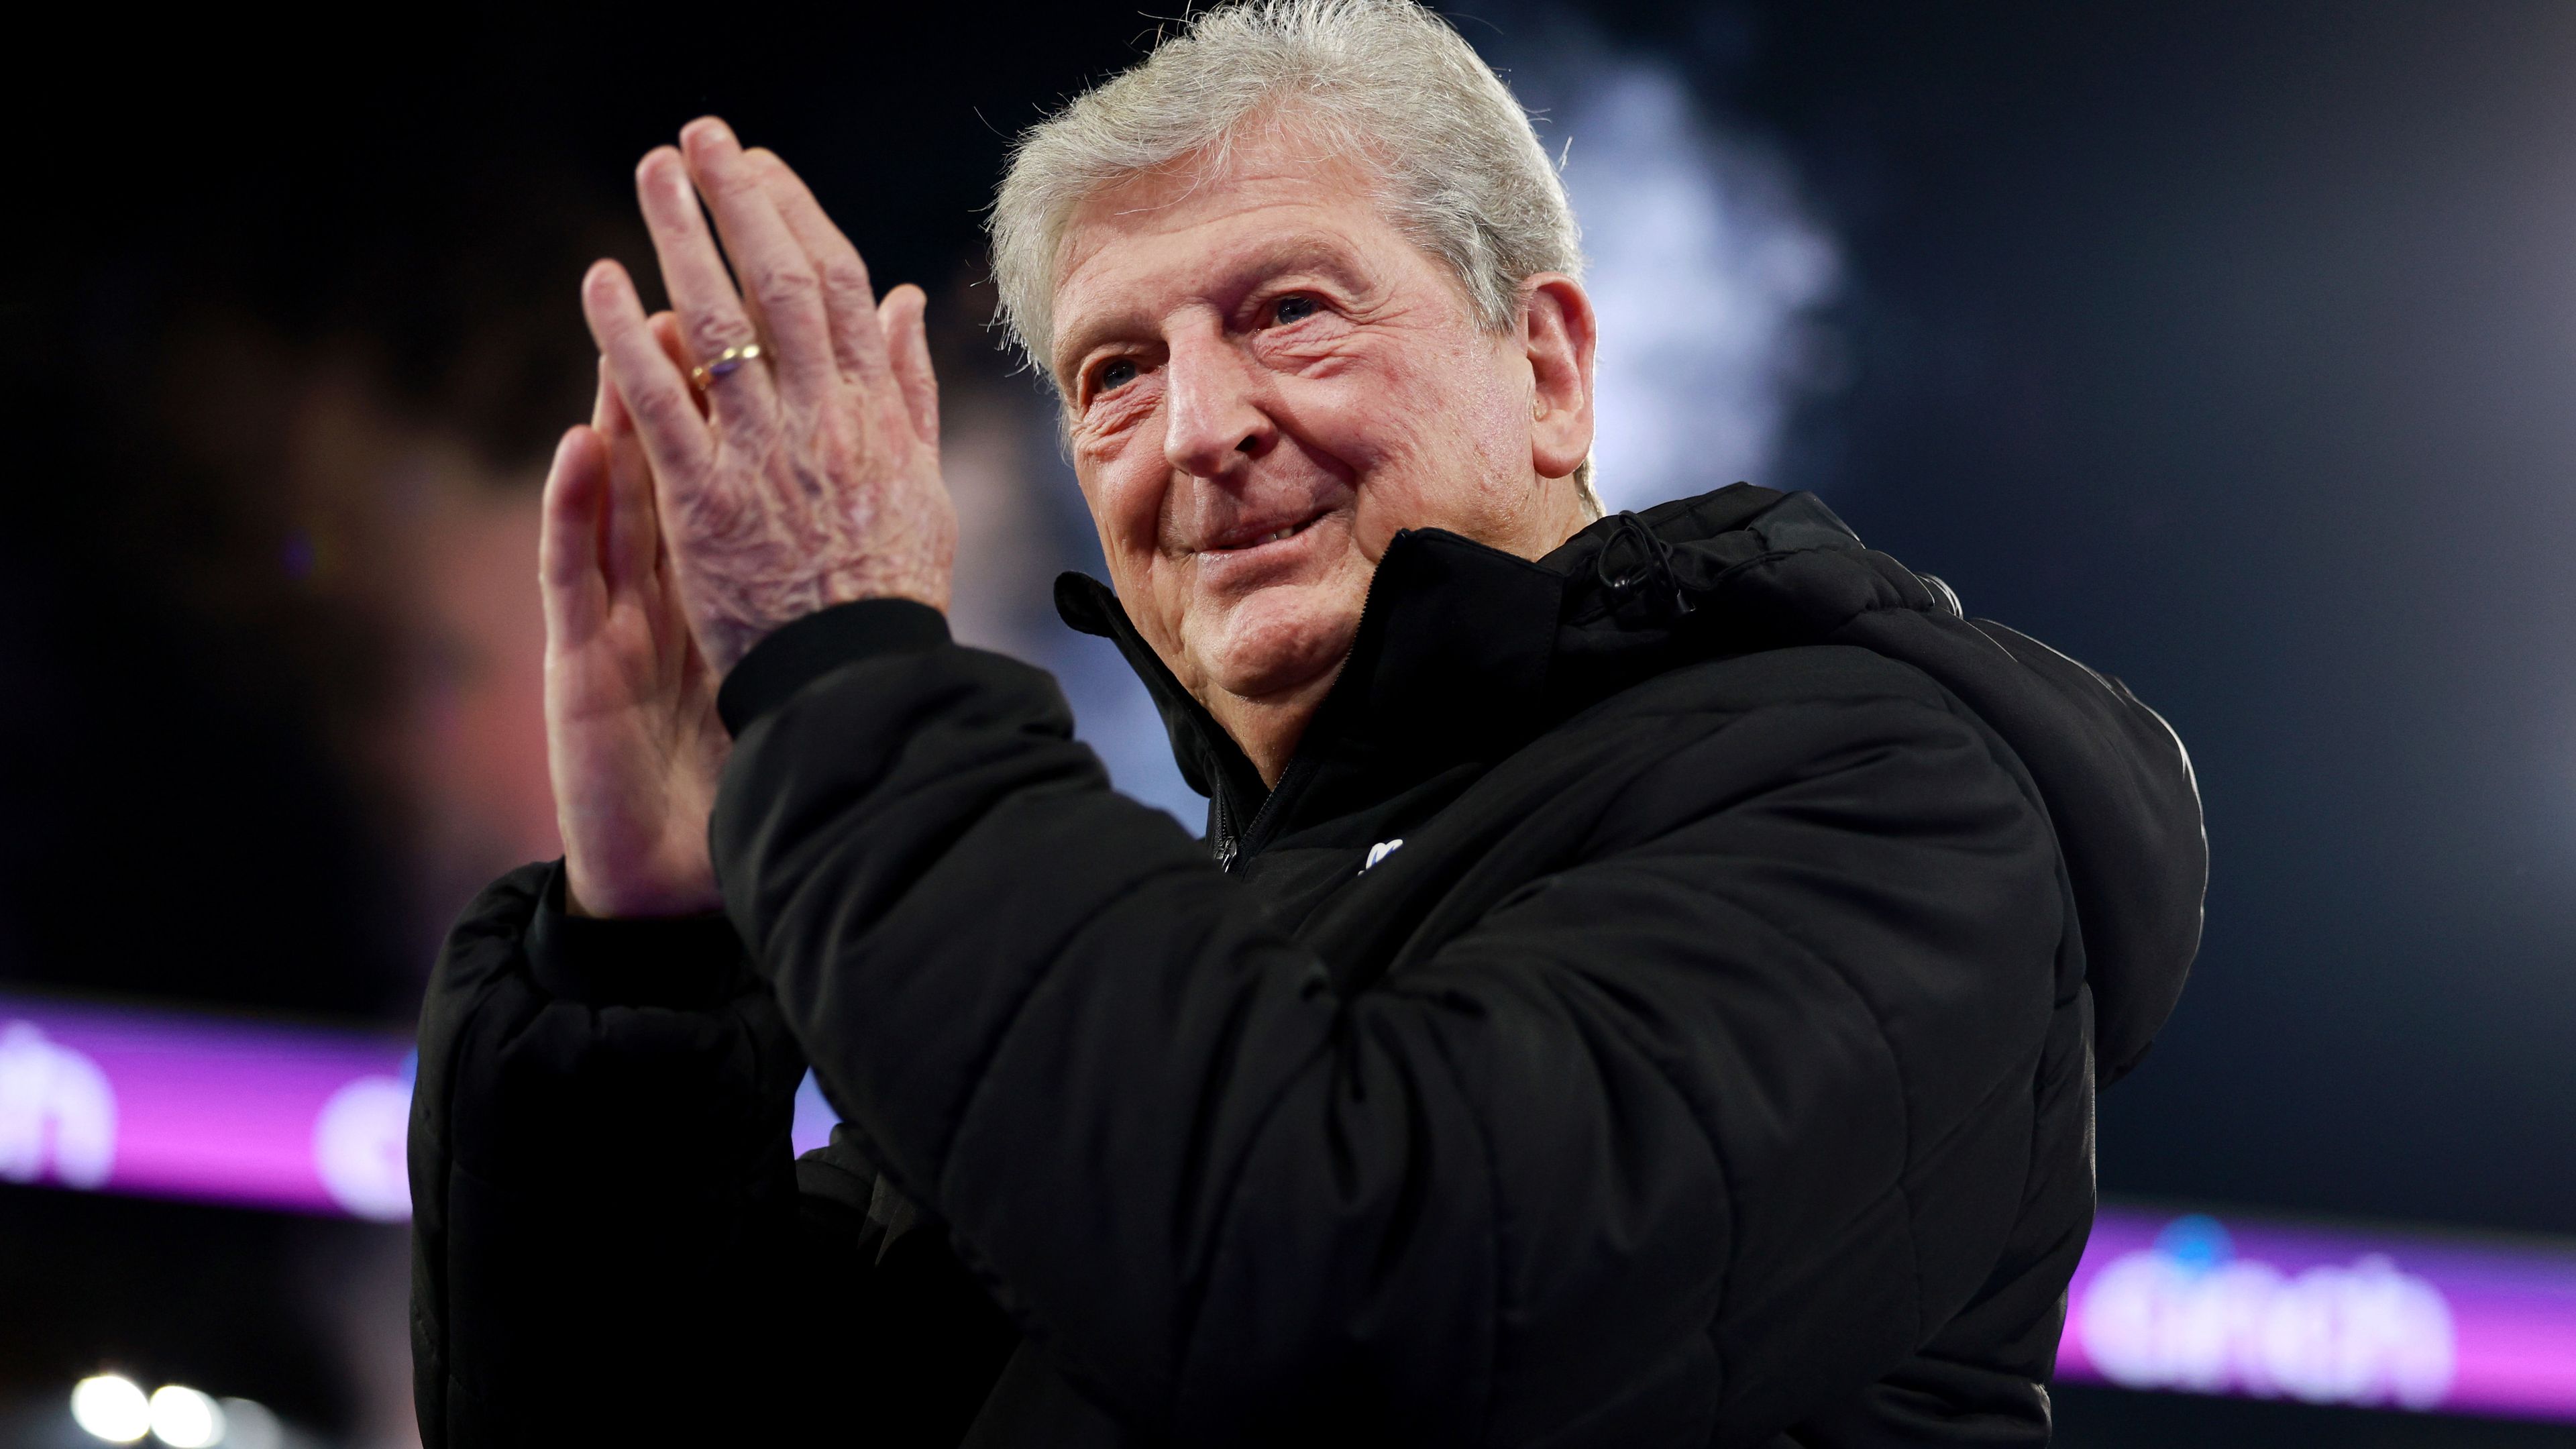 England football icon Roy Hodgson hospitalised after becoming ill during training session